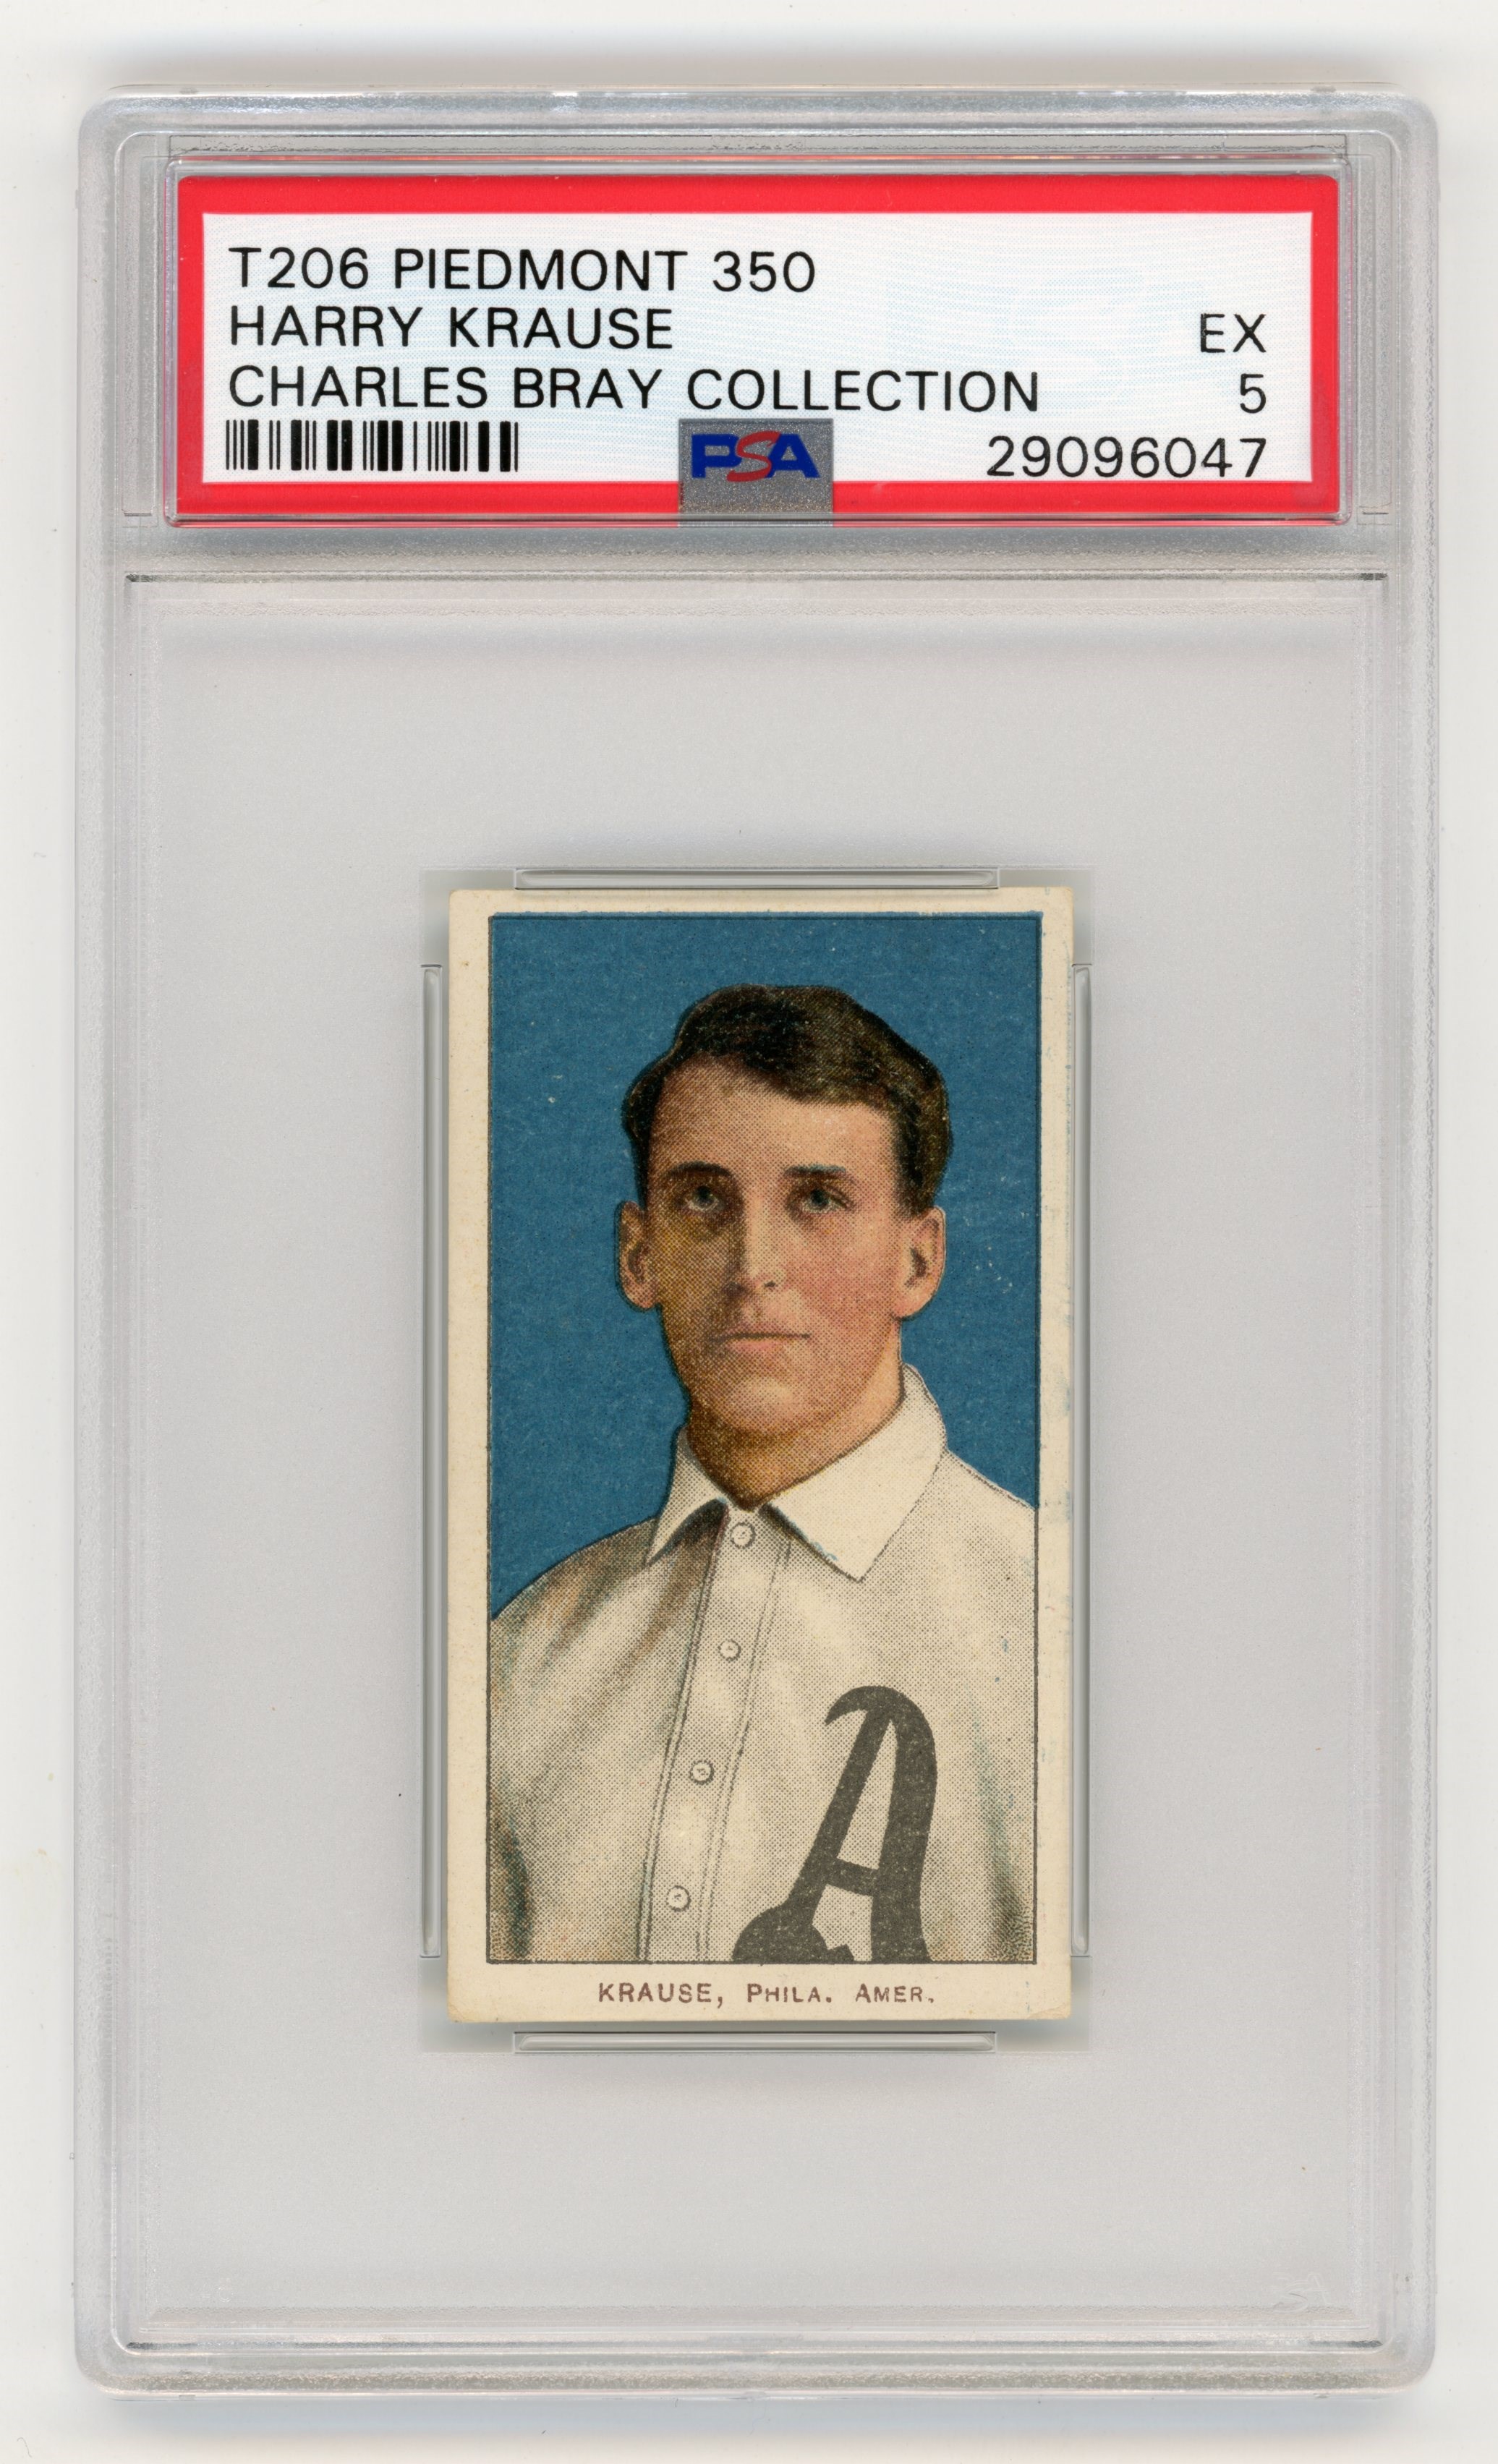 T206 Piedmont 350 Harry Krause PSA 5 From The Charles Bray Collection